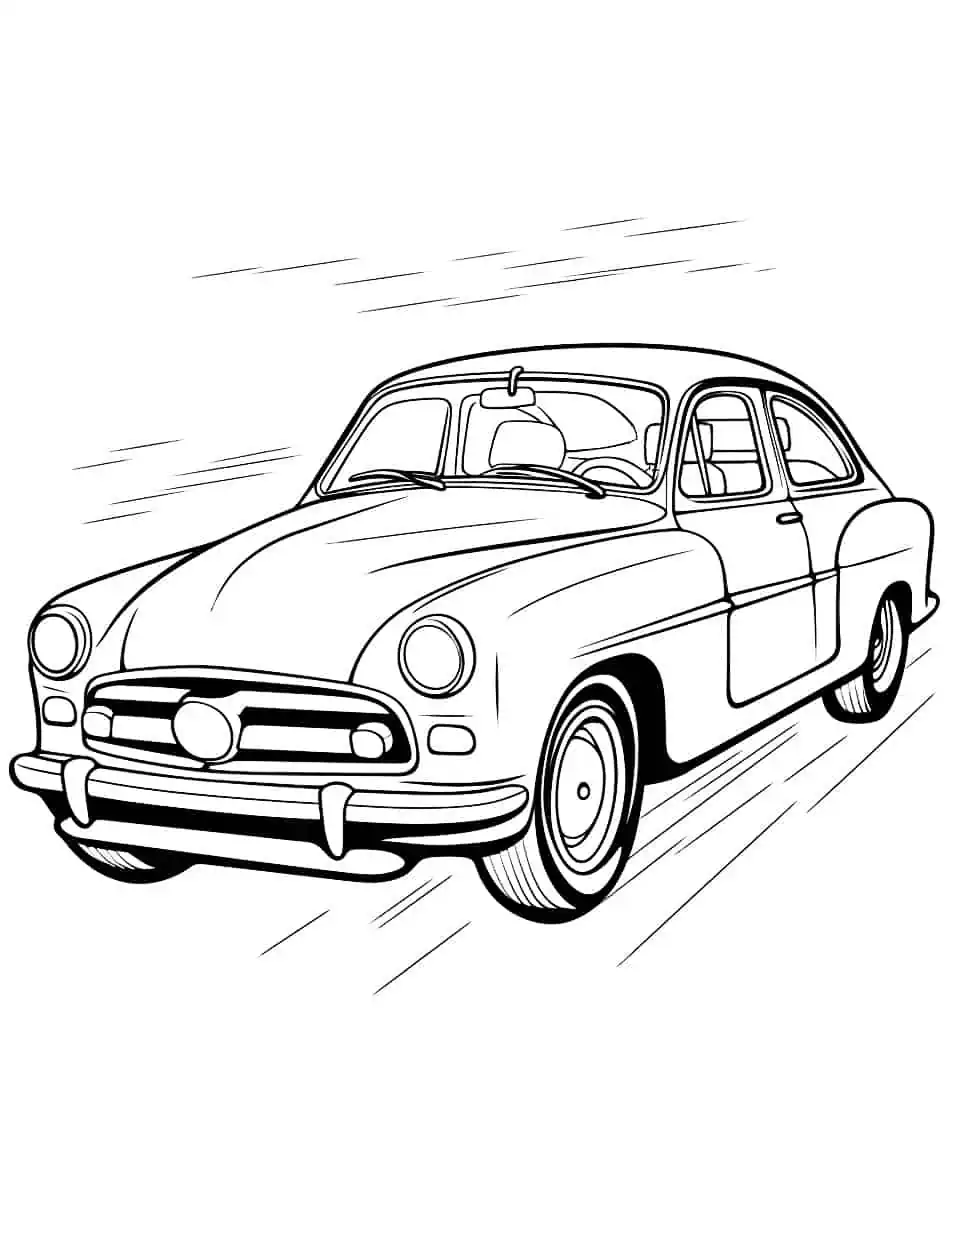 Retro Ride Car Coloring Page - A coloring page of a classic, old car.